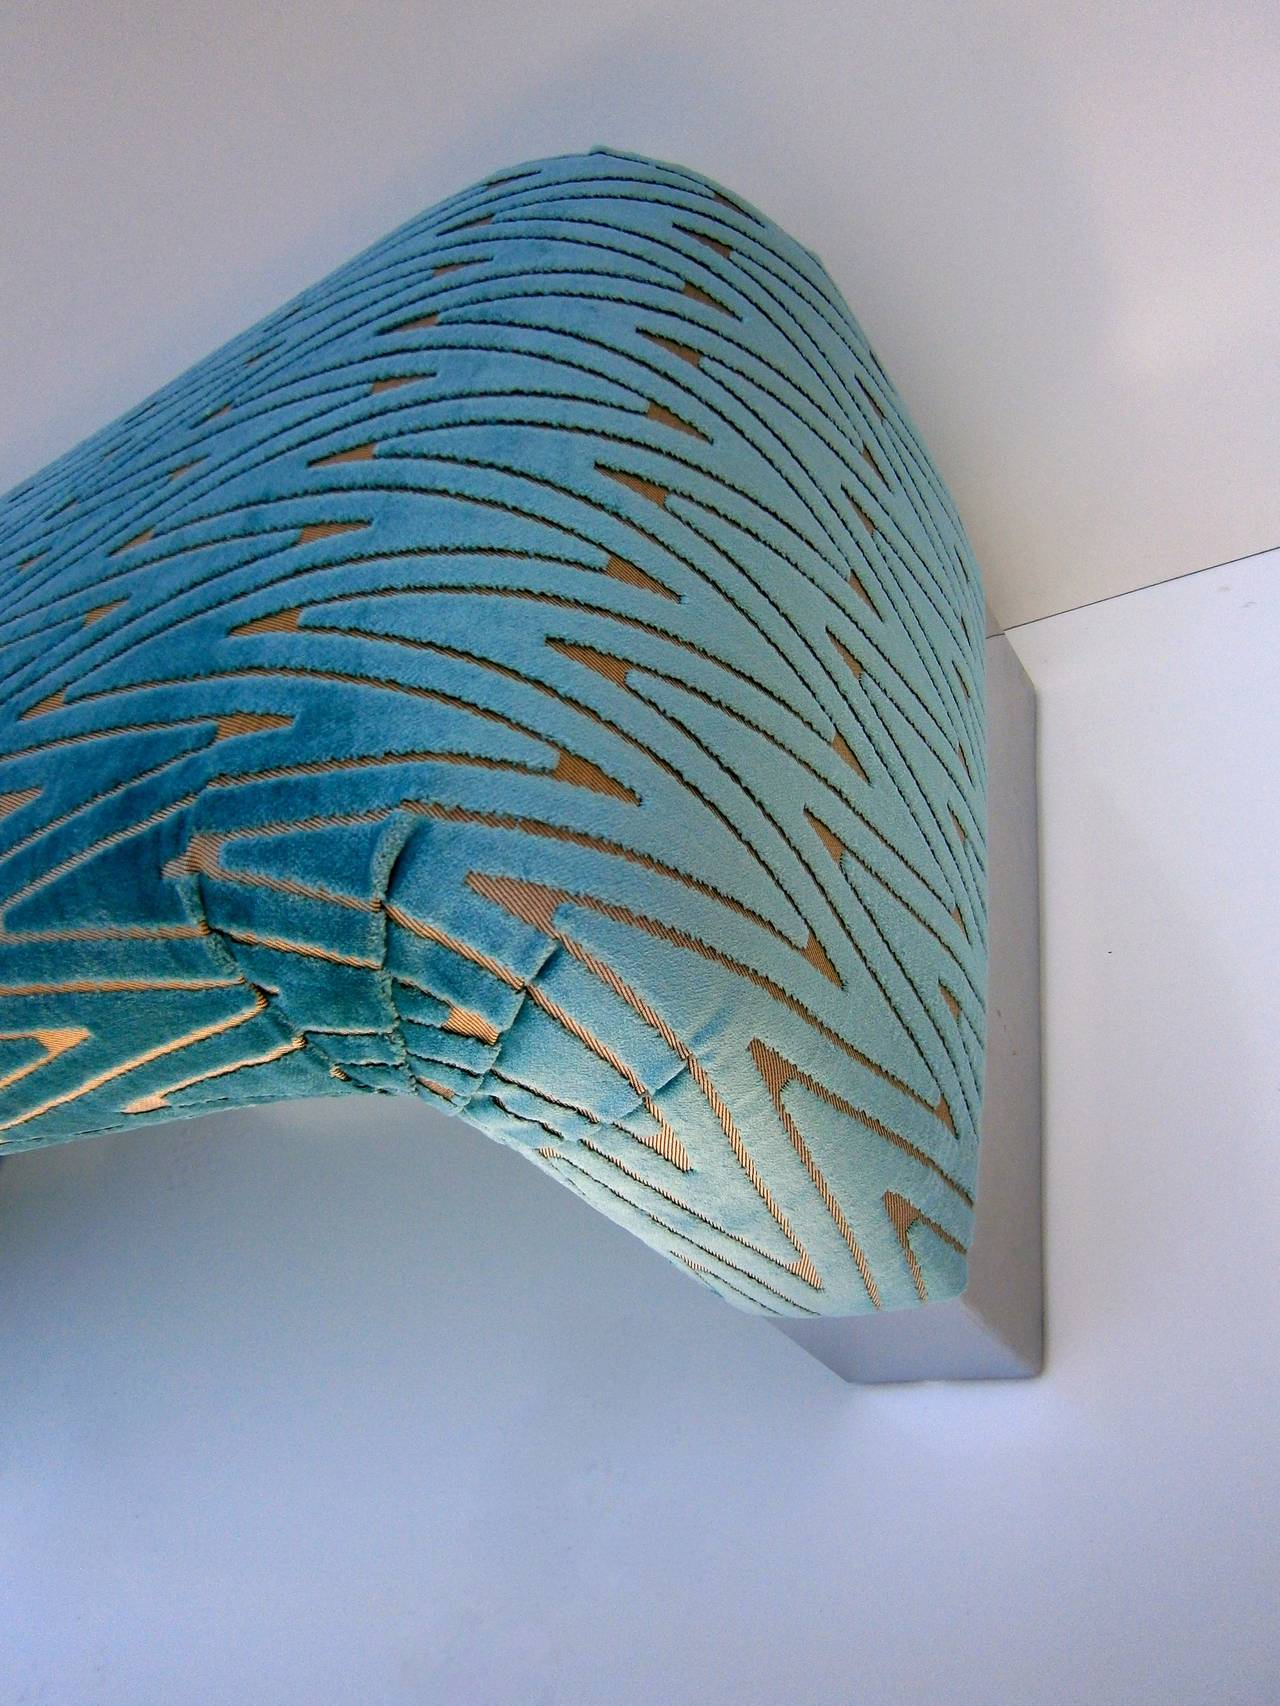 Steel Luxurious Upholstered Waterfall Bench in the Style of Steve Chase.  C. 1992